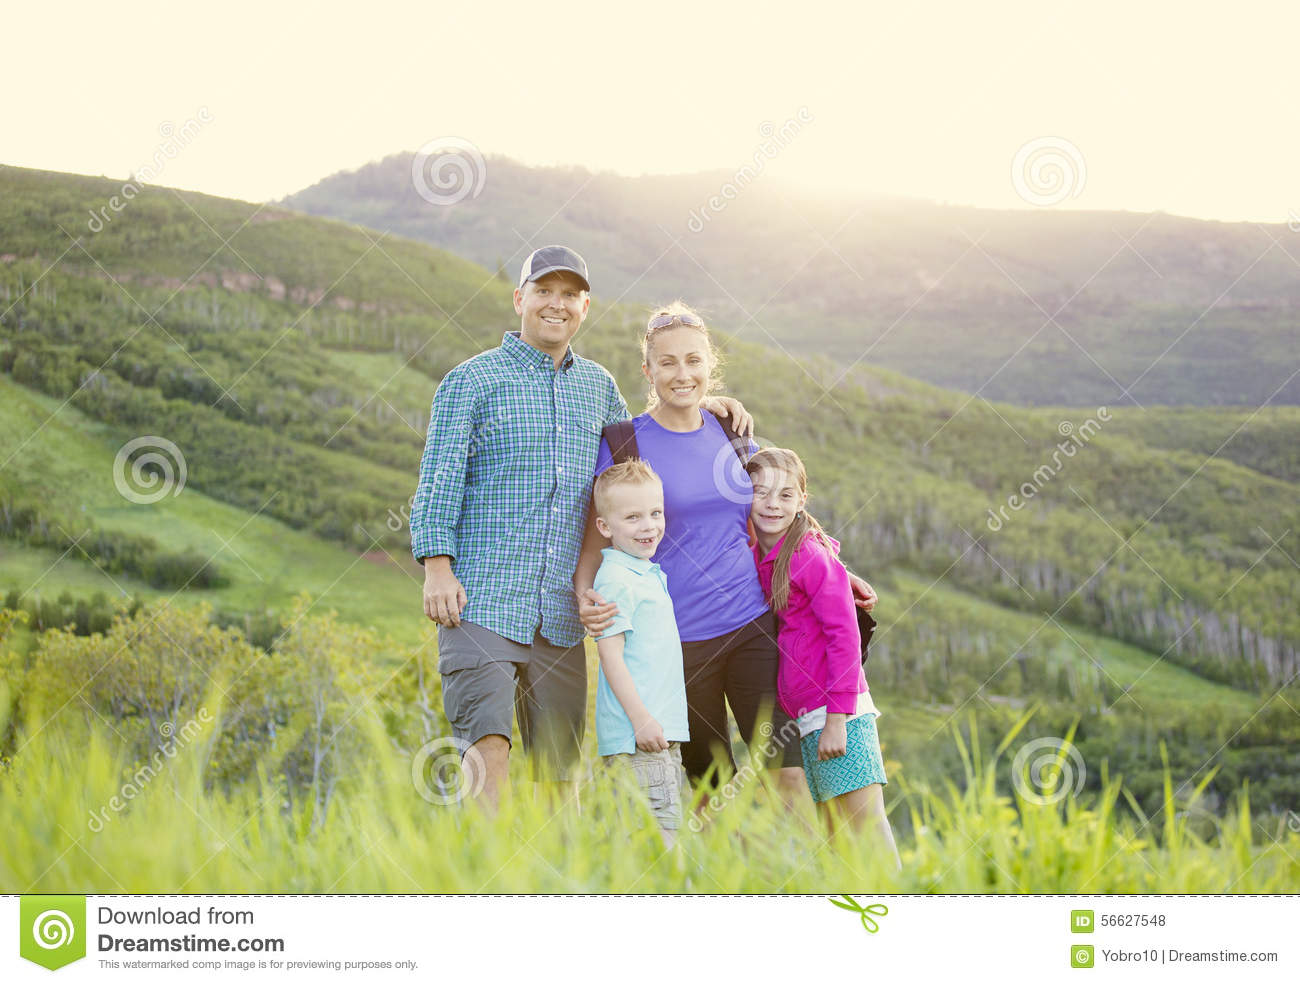 Beautiful Young Family On A Hike In The Mountains Stock Photo   Image